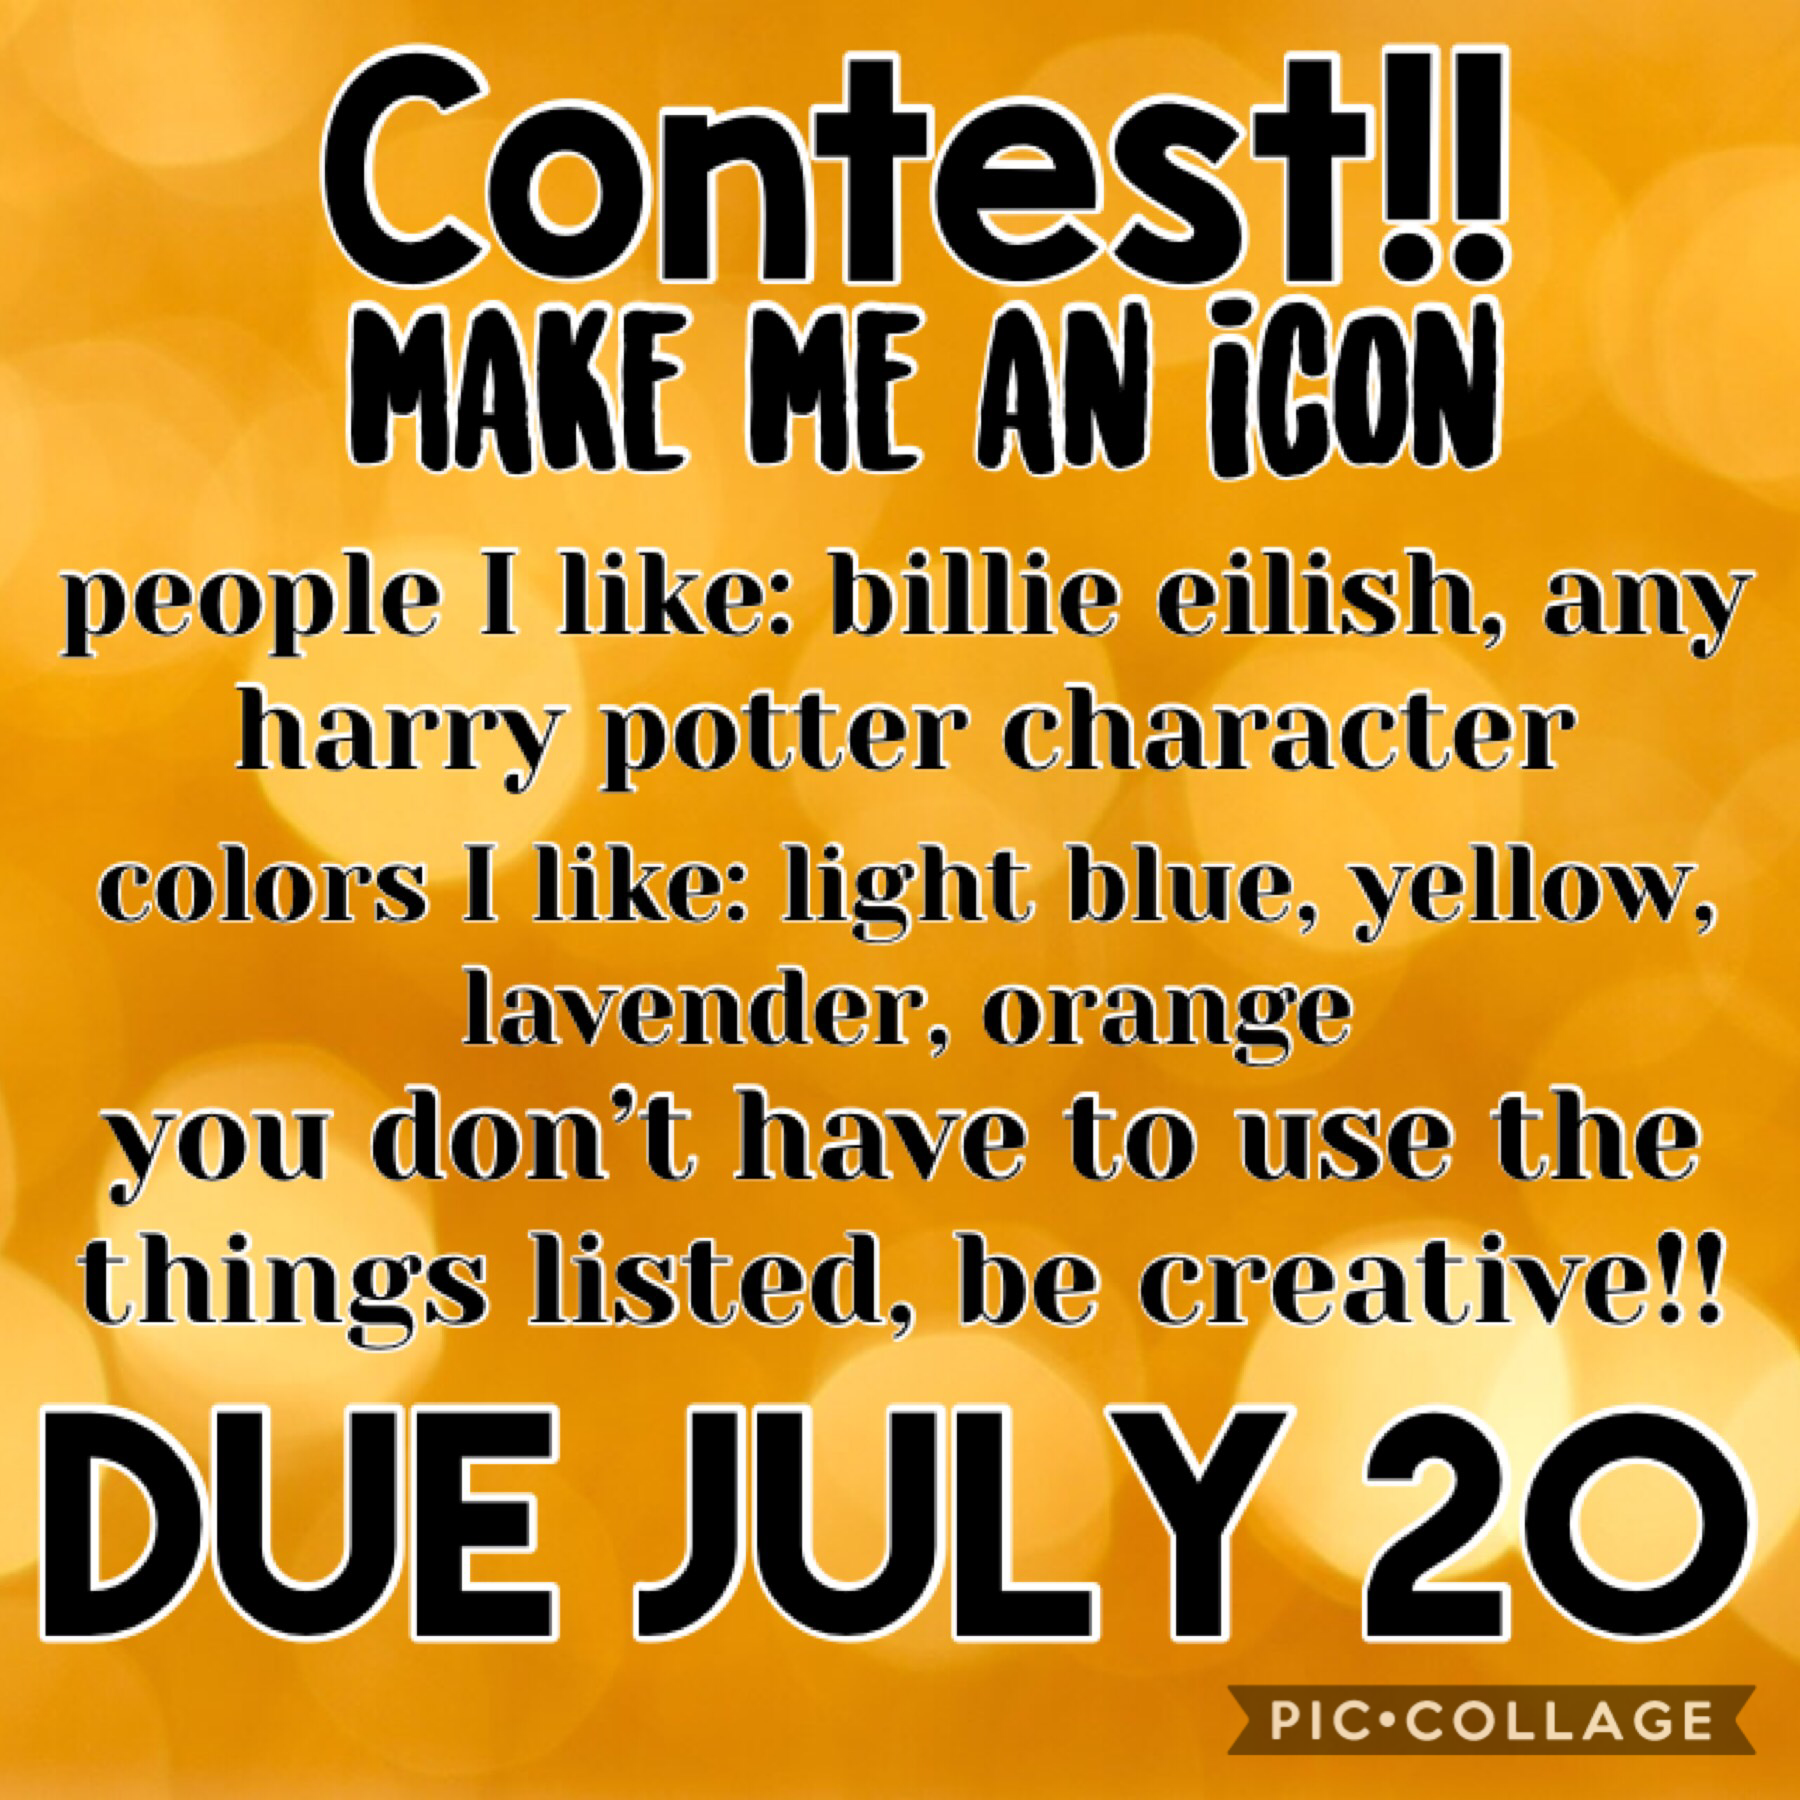 i like my current icon, but the most suggested contest was an icon contest. if i don’t like any entries more than my current icon, i will keep the current icon but still give my three favorites prizes. Prizes will be decided at the end of the contest. if 